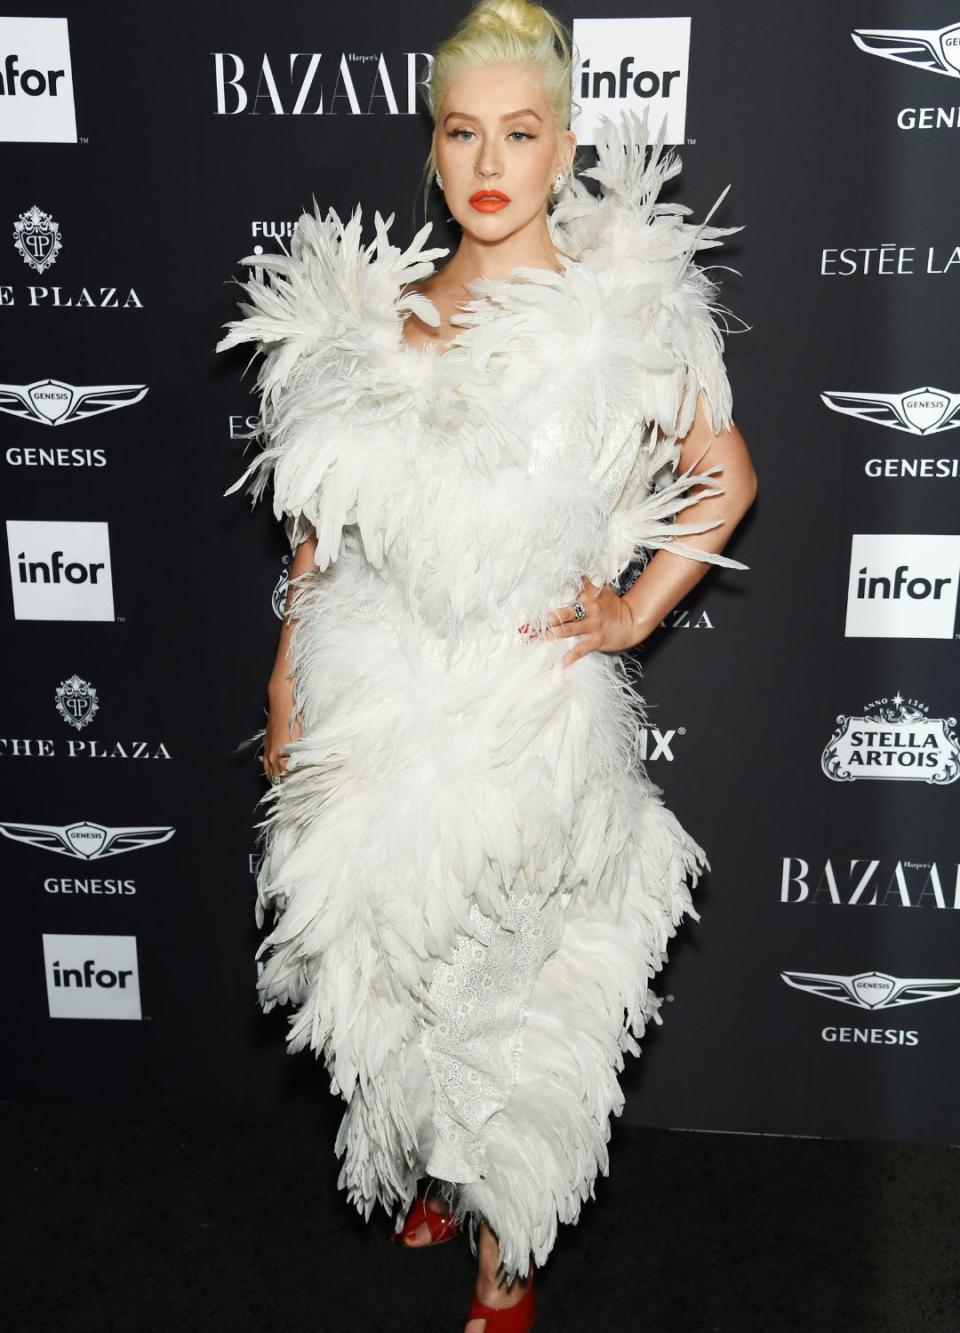 <p> This one might give you a little deja vu, as it's not the first time the pop star has sported a statement feathered look. For the Bazaar Icons party in 2018, Christina wore a Vivienne Westwood dress which was covered head to toe in white feathers. She paired the eye-catching dress with a bold coral lip and matching red shoes. </p>